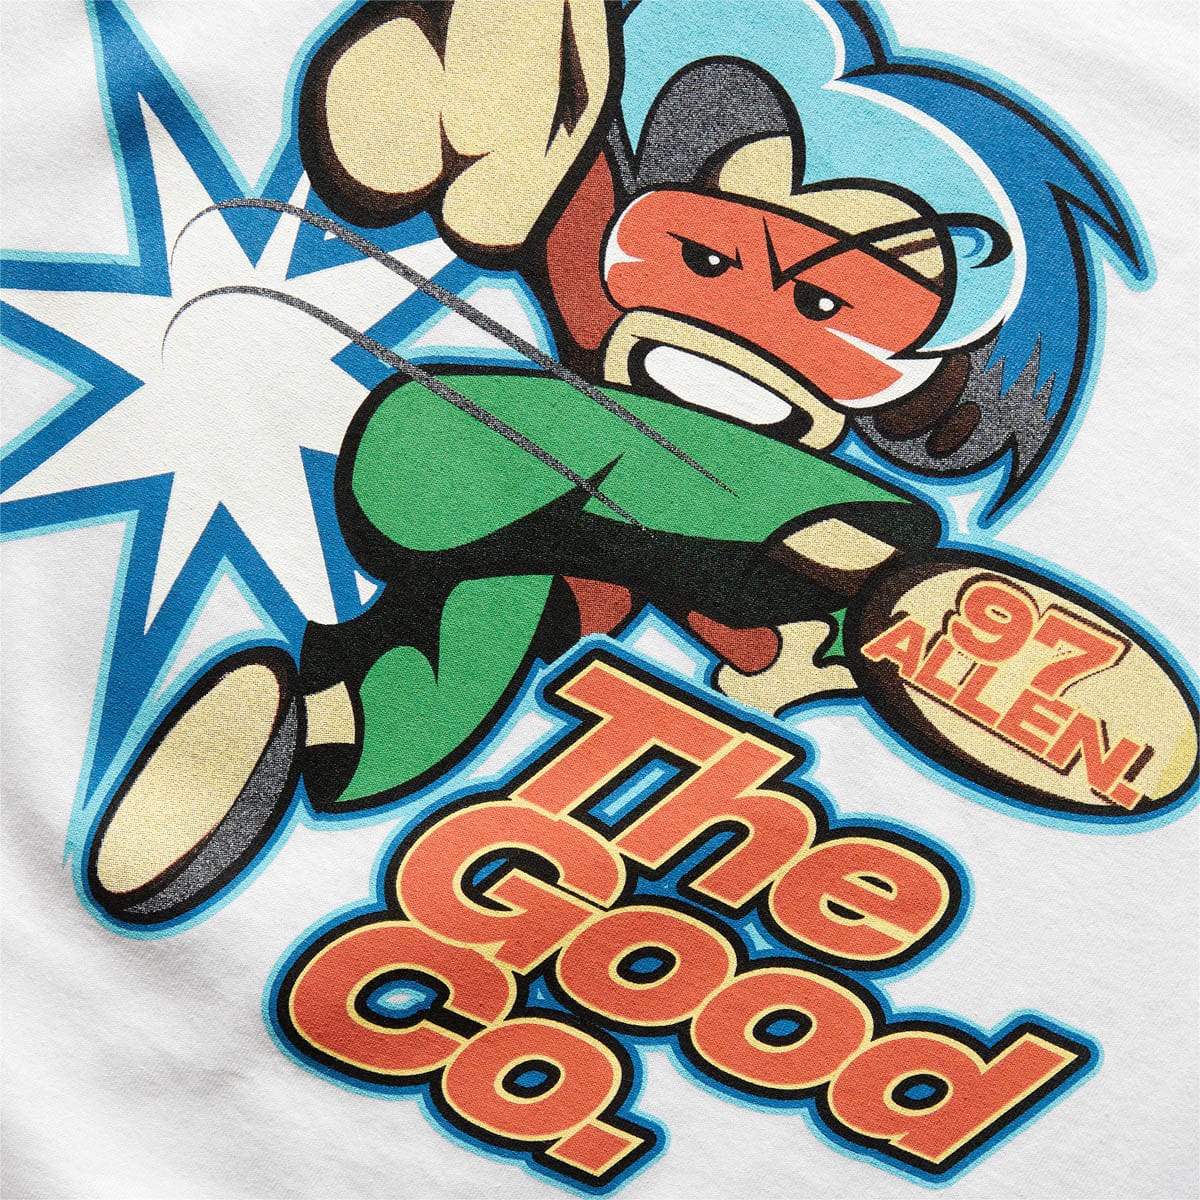 The Good Company T-Shirts ACTION TEE